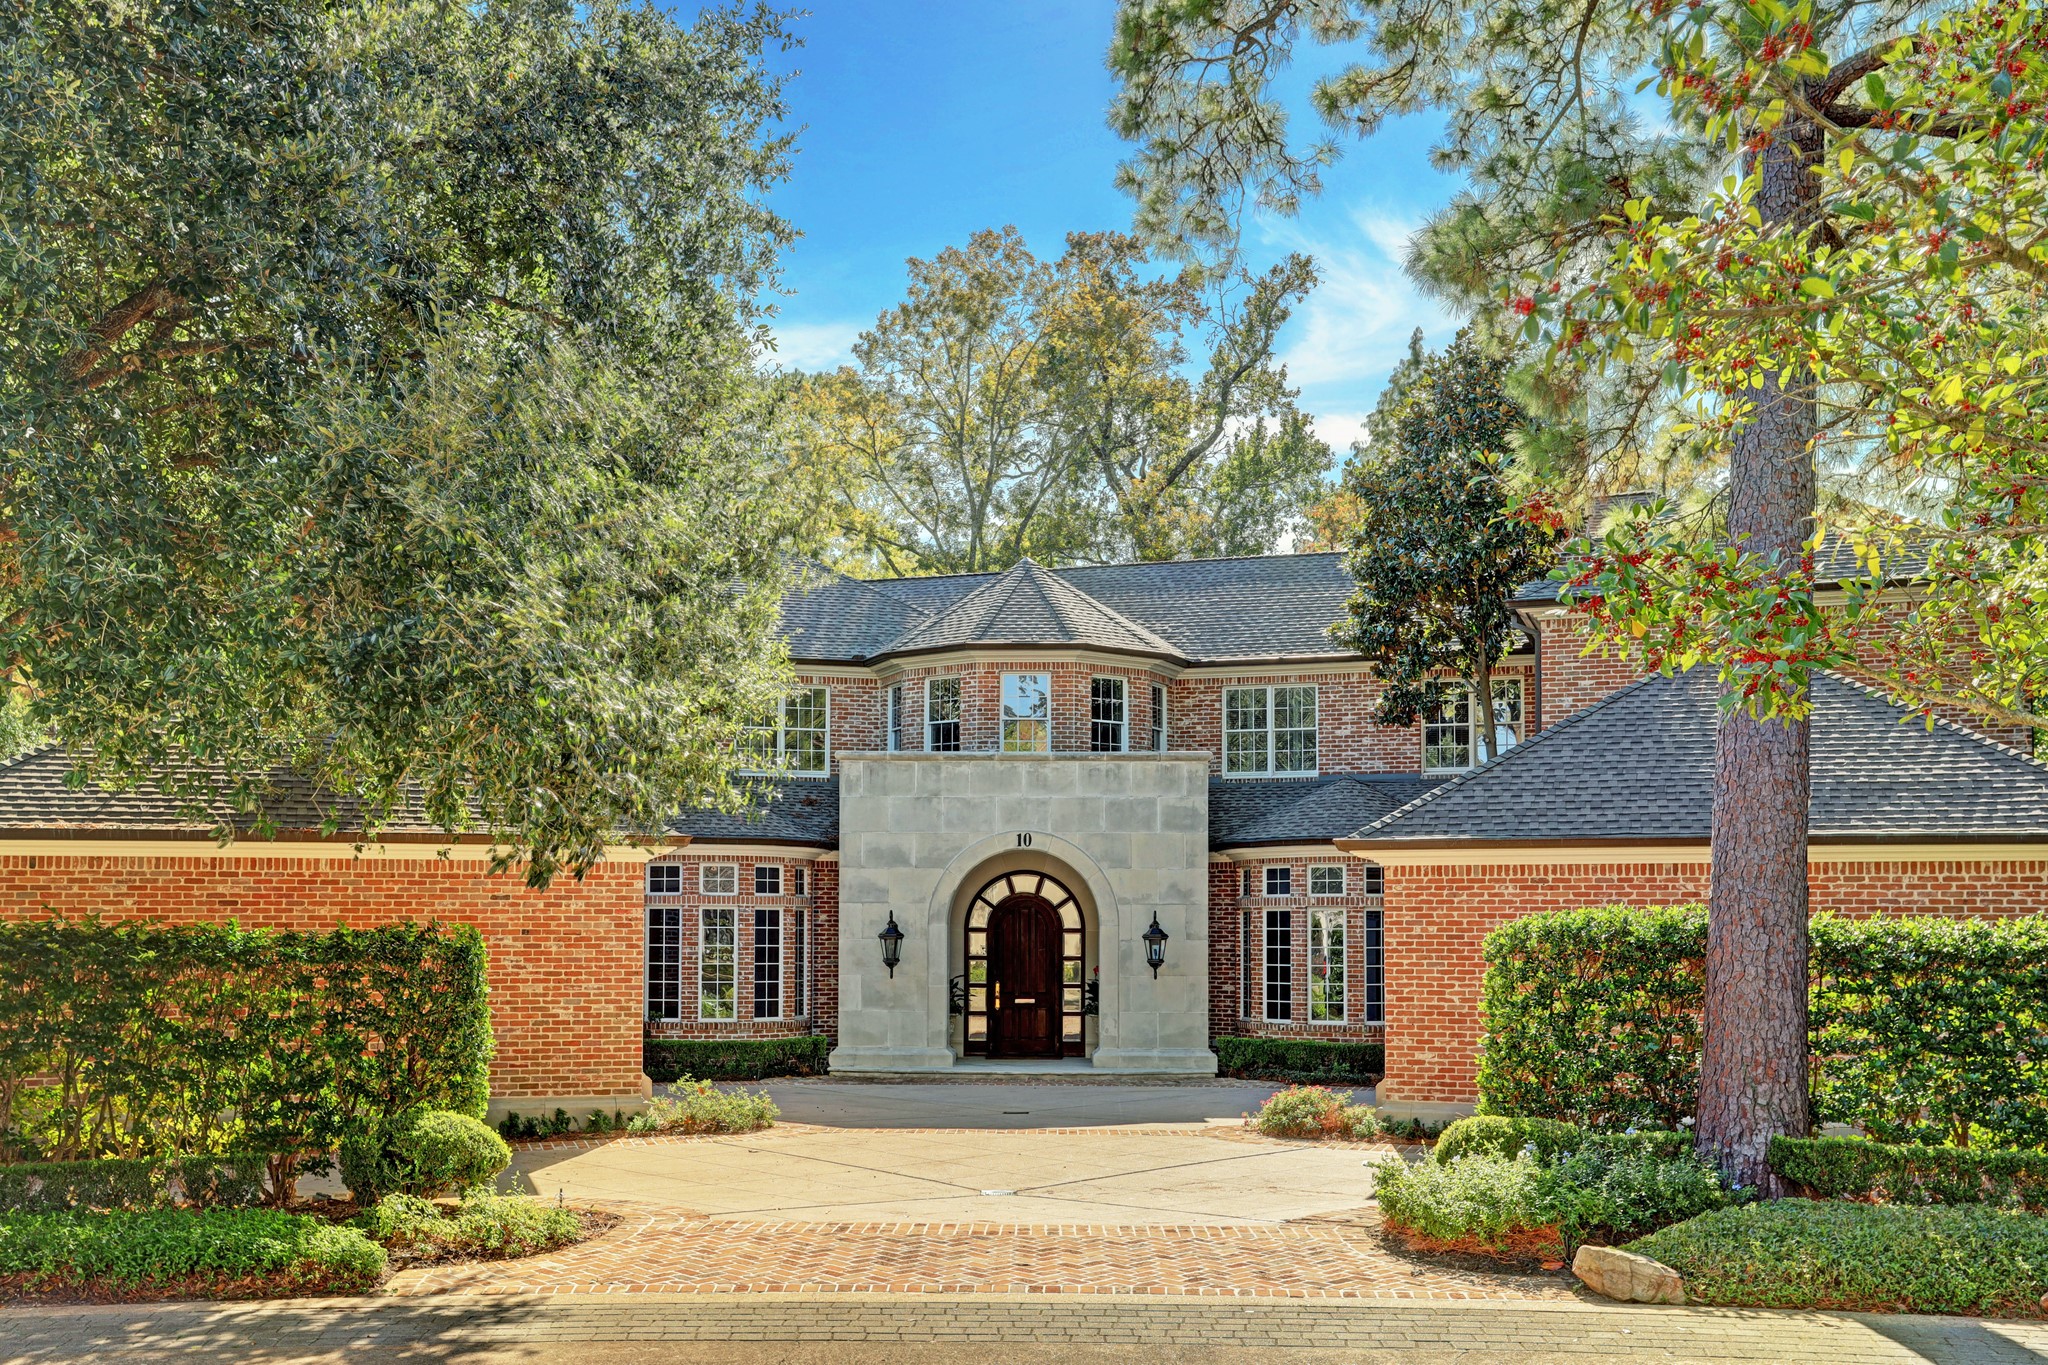 [Front Elevation]
The upscale neighborhood of Arlington Court, a pocket neighborhood of only 68 homes, boasts one of the finest locations inside Houston’s inner Loop. The magnificent home at 10 E. Bend, positioned on a 43,918sf lot, offers an interior location that overlooks the deep wooded ravine that traverses the neighborhood.